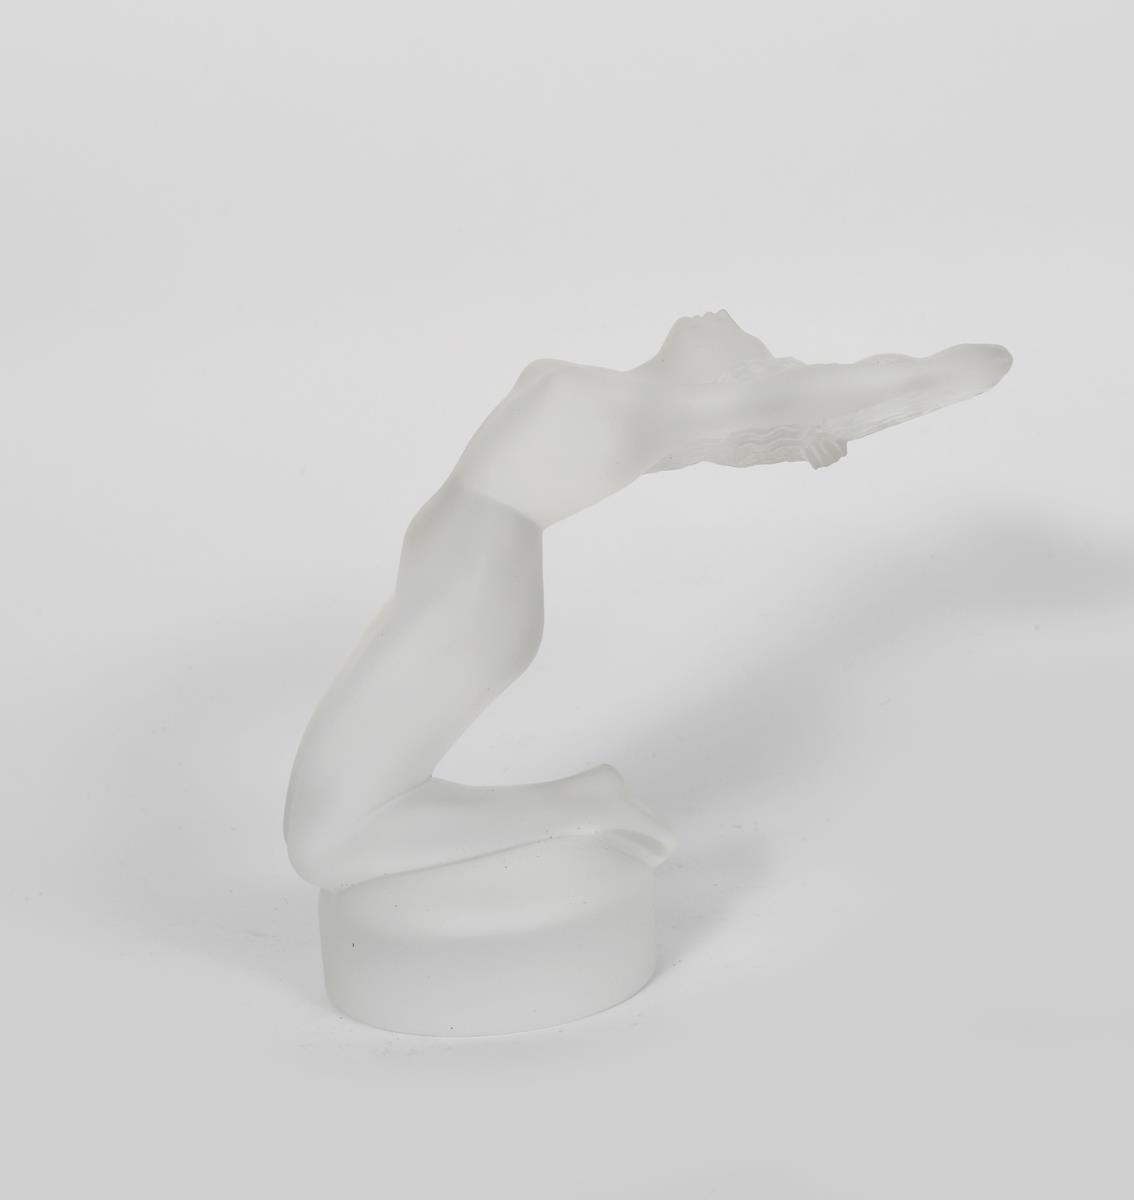 'Chrysis' a modern Lalique frosted glass figure originally designed by Rene Lalique, in original